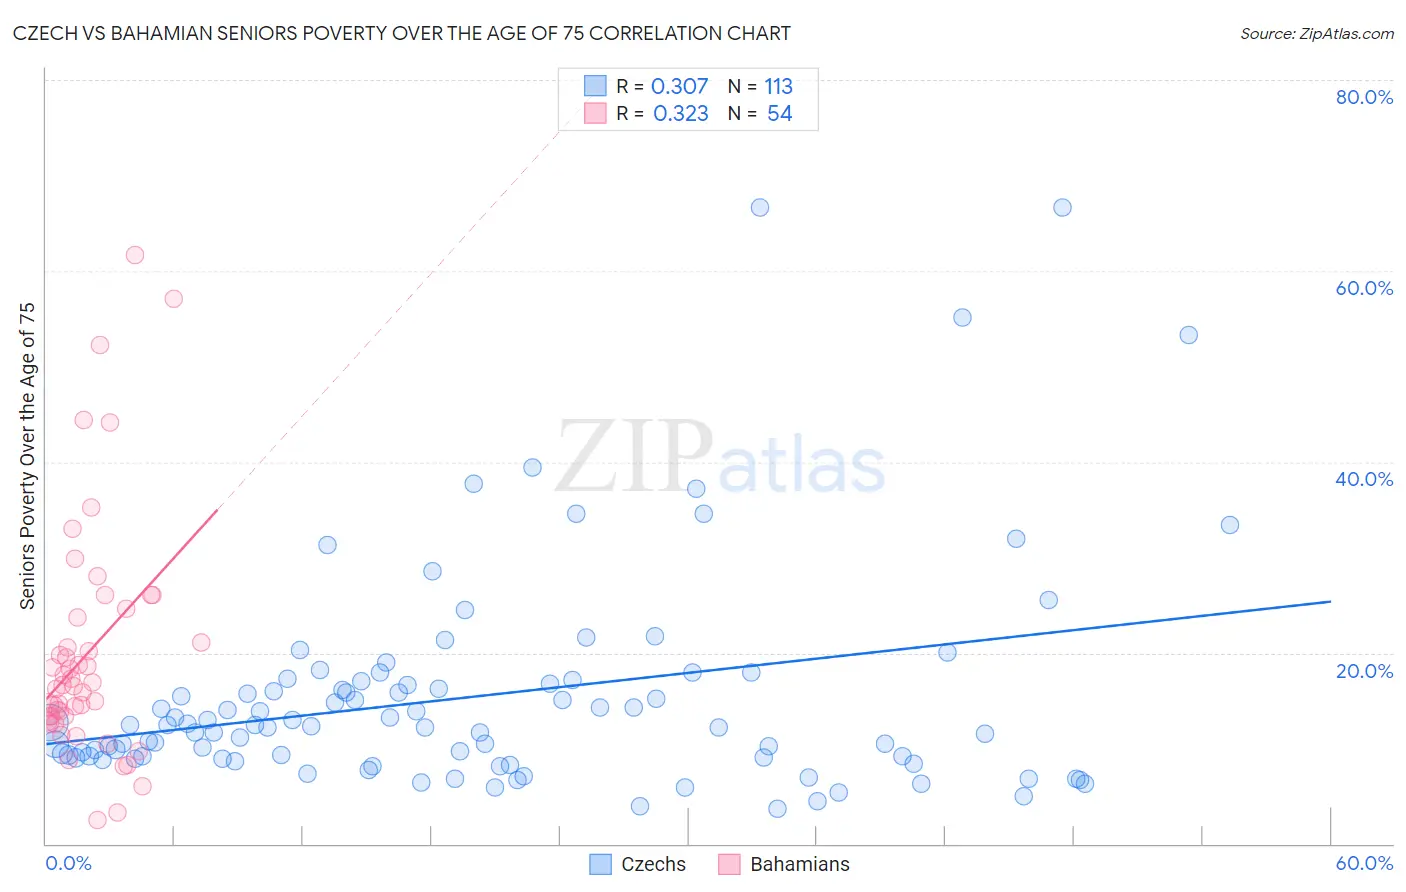 Czech vs Bahamian Seniors Poverty Over the Age of 75